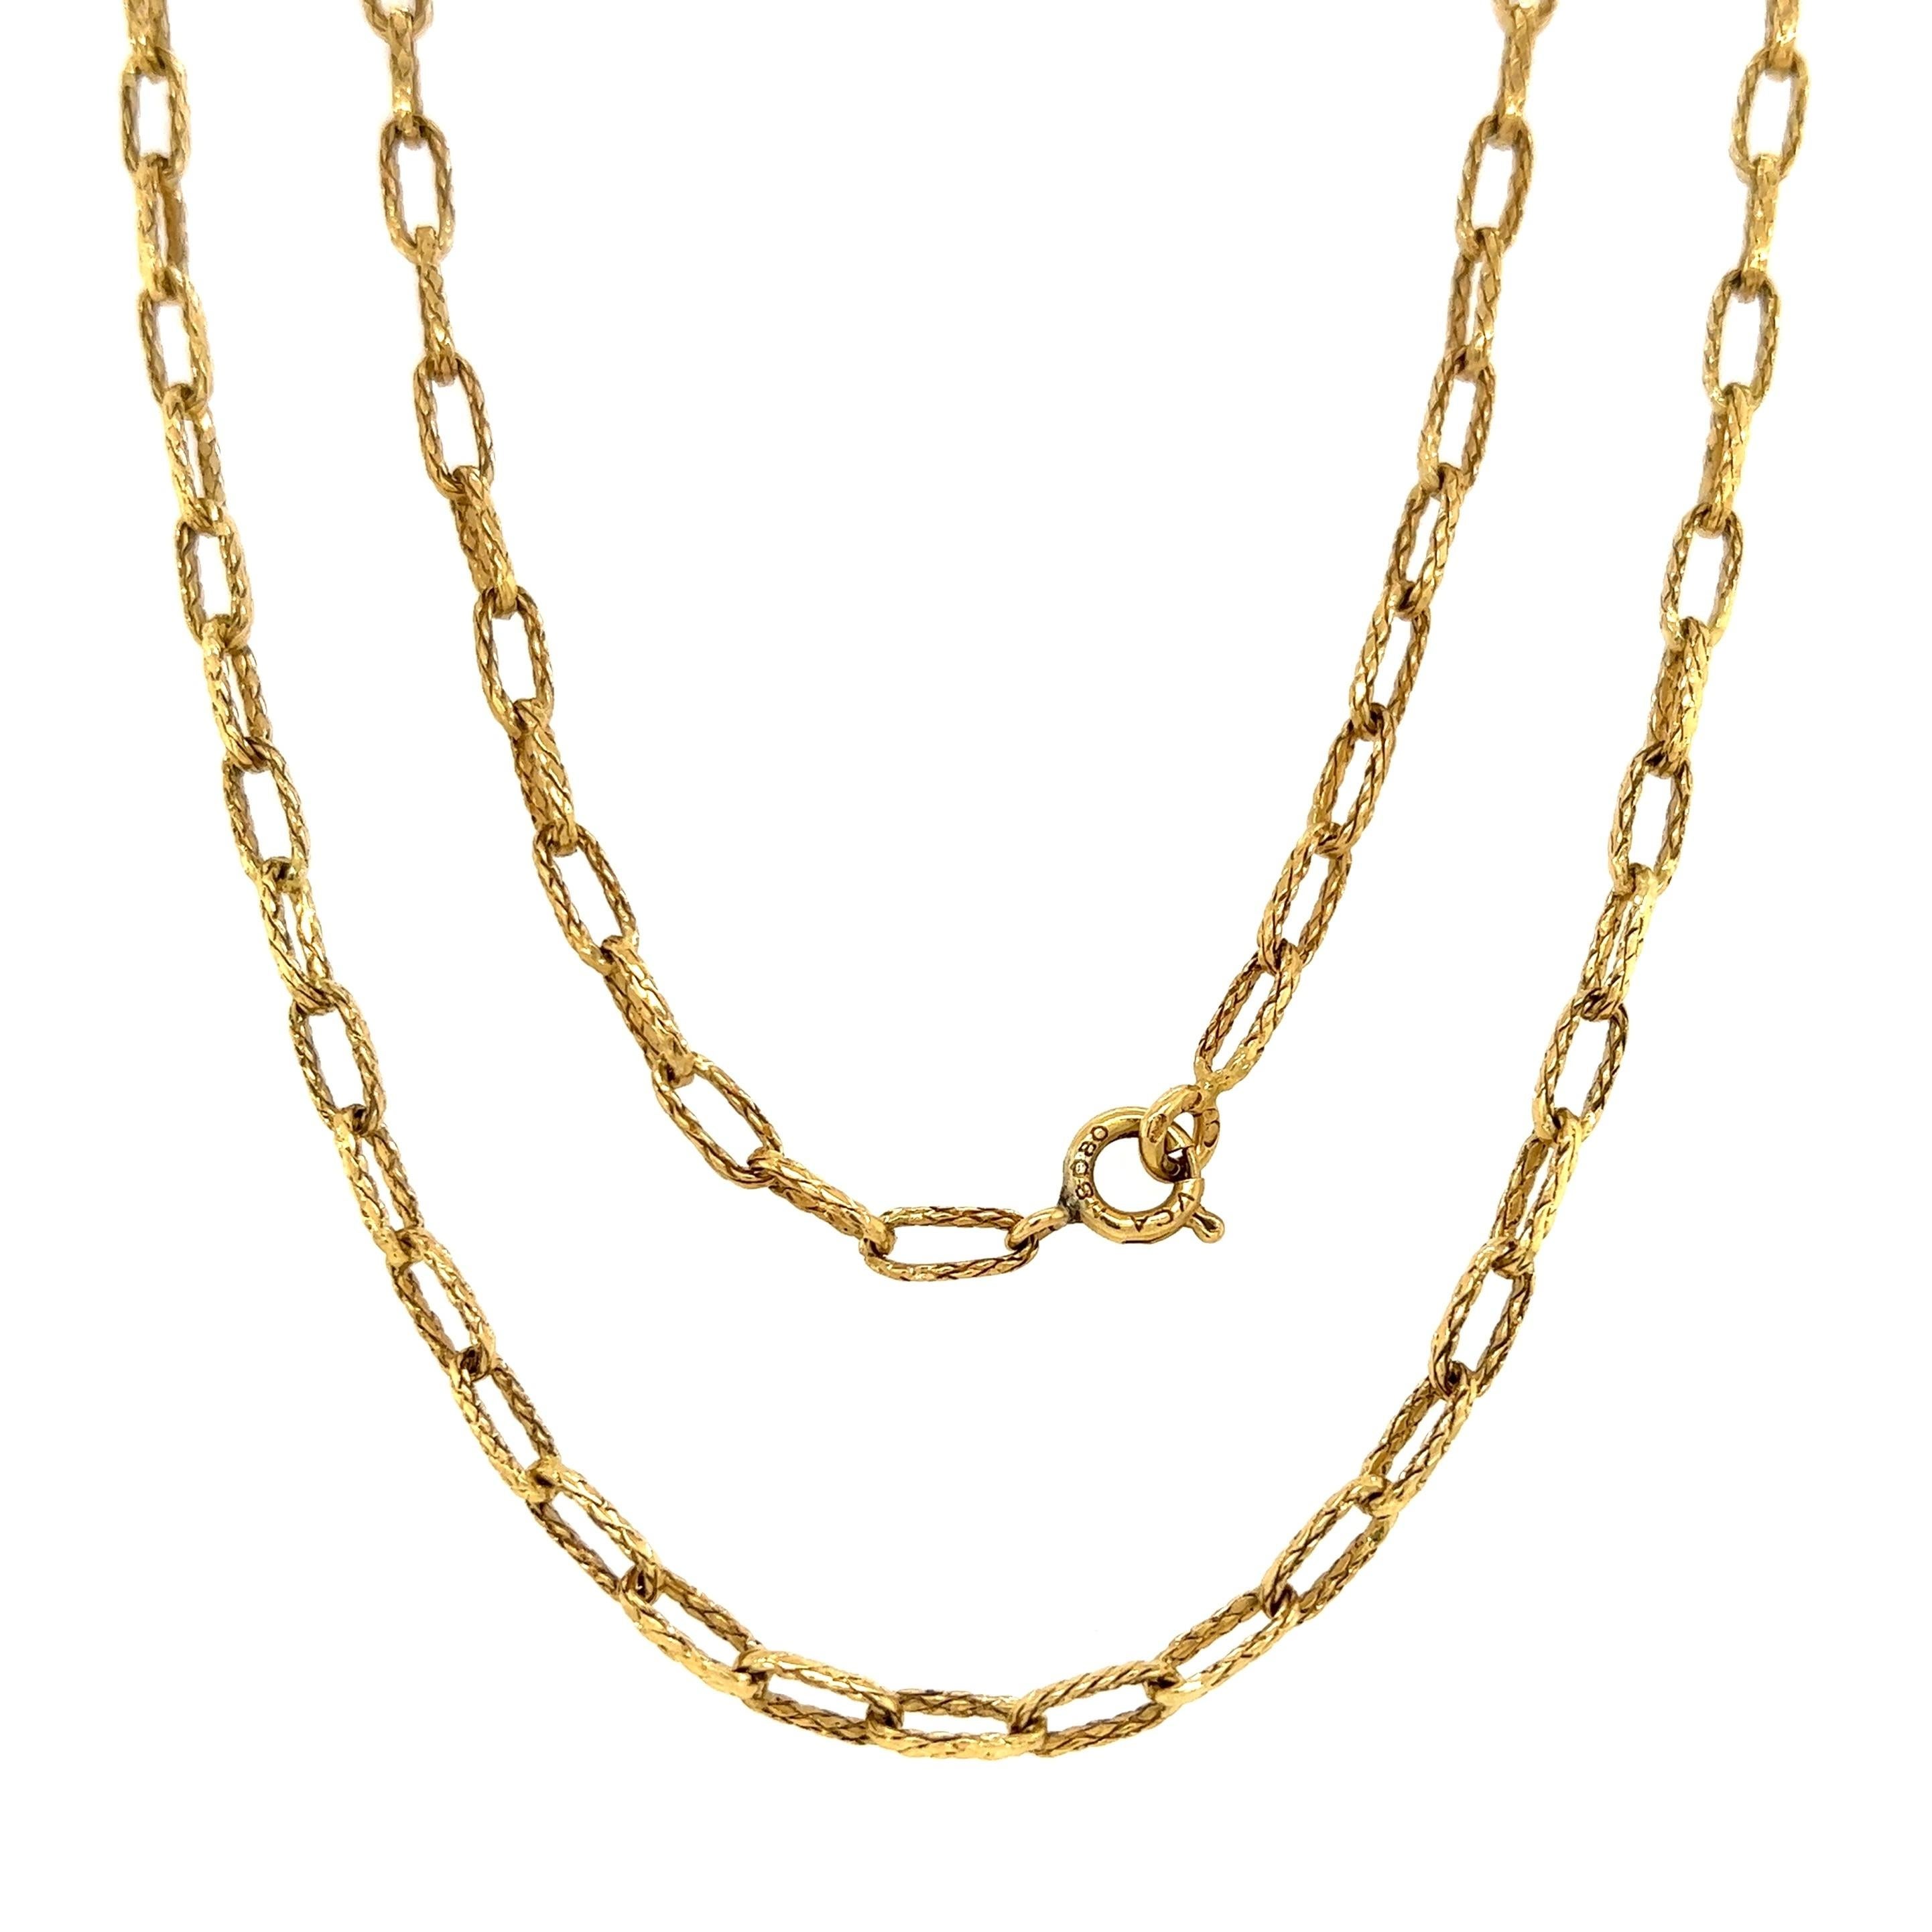 Iconic Van Cleef and Arpels High Quality 18K Yellow Solid Gold  Weaved Rope Open Links Chain Necklace. Beautifully Hand crafted in 18K Yellow Gold. Measuring approx. 27